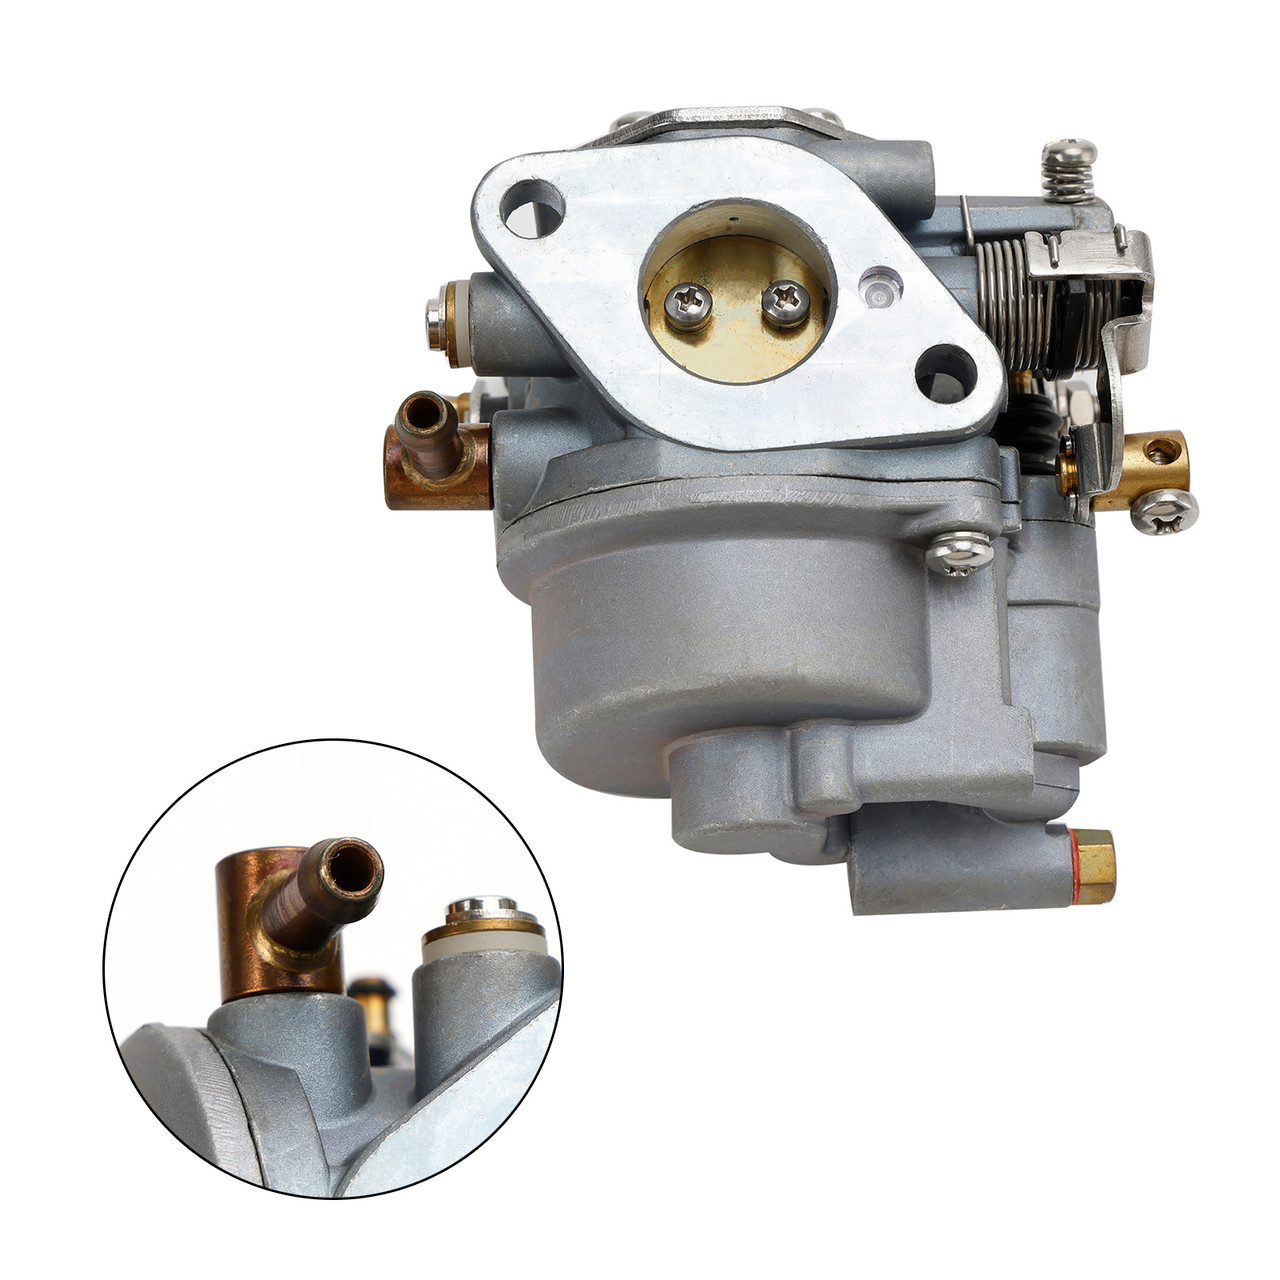 Carburetor Carb fit for YAMAHA 4 stroke 8hp 9.9hp F8M Outboard 68T-14301-11-00